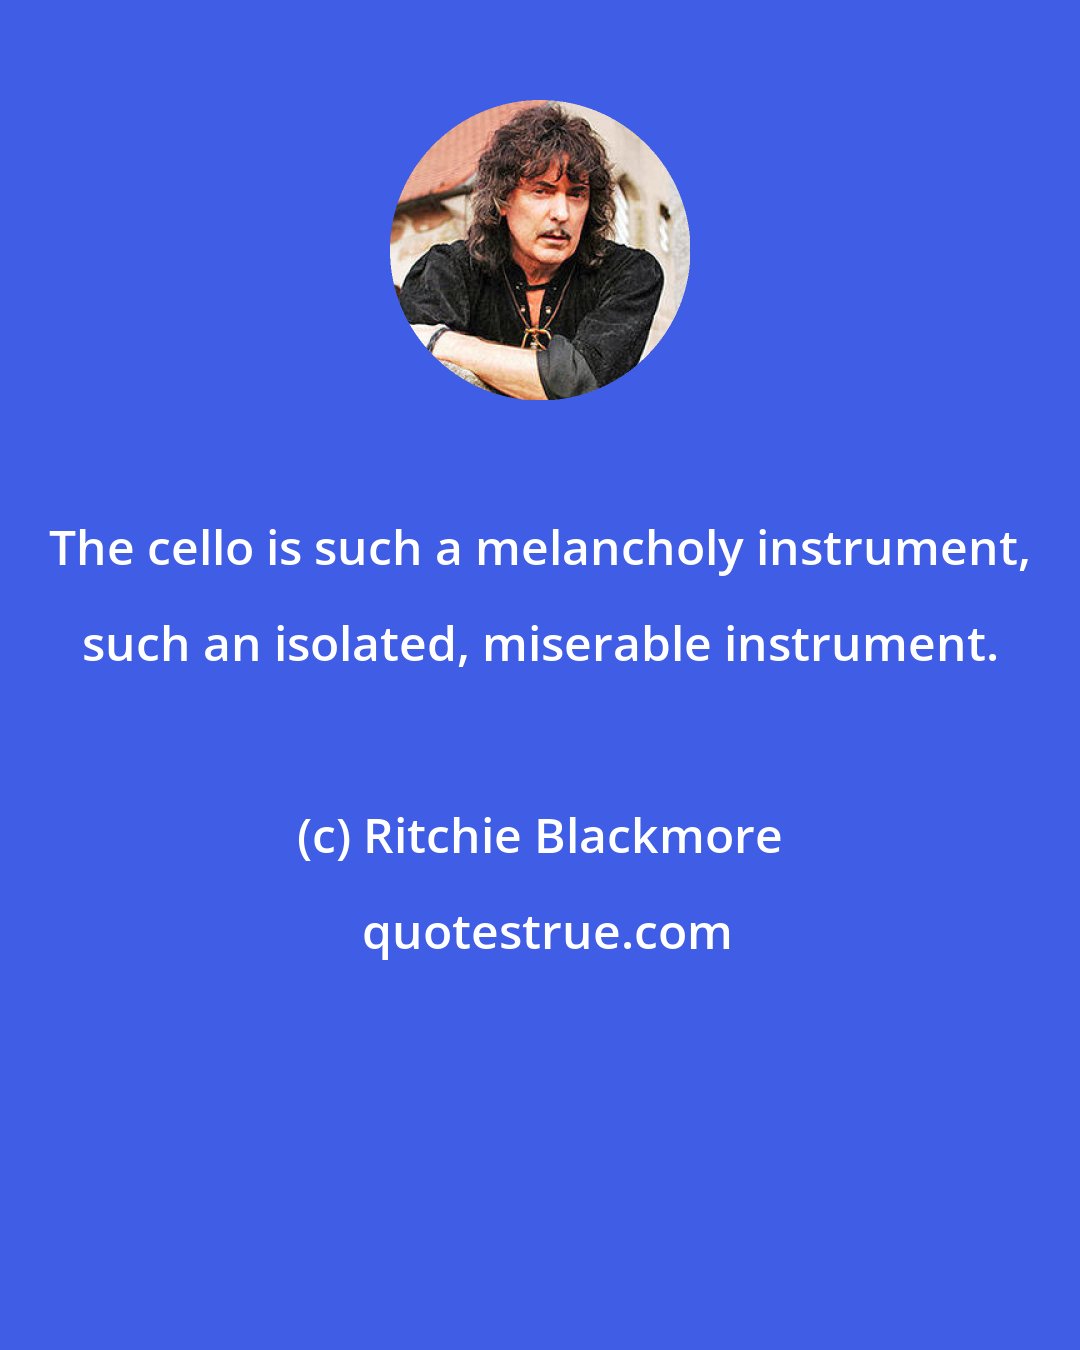 Ritchie Blackmore: The cello is such a melancholy instrument, such an isolated, miserable instrument.